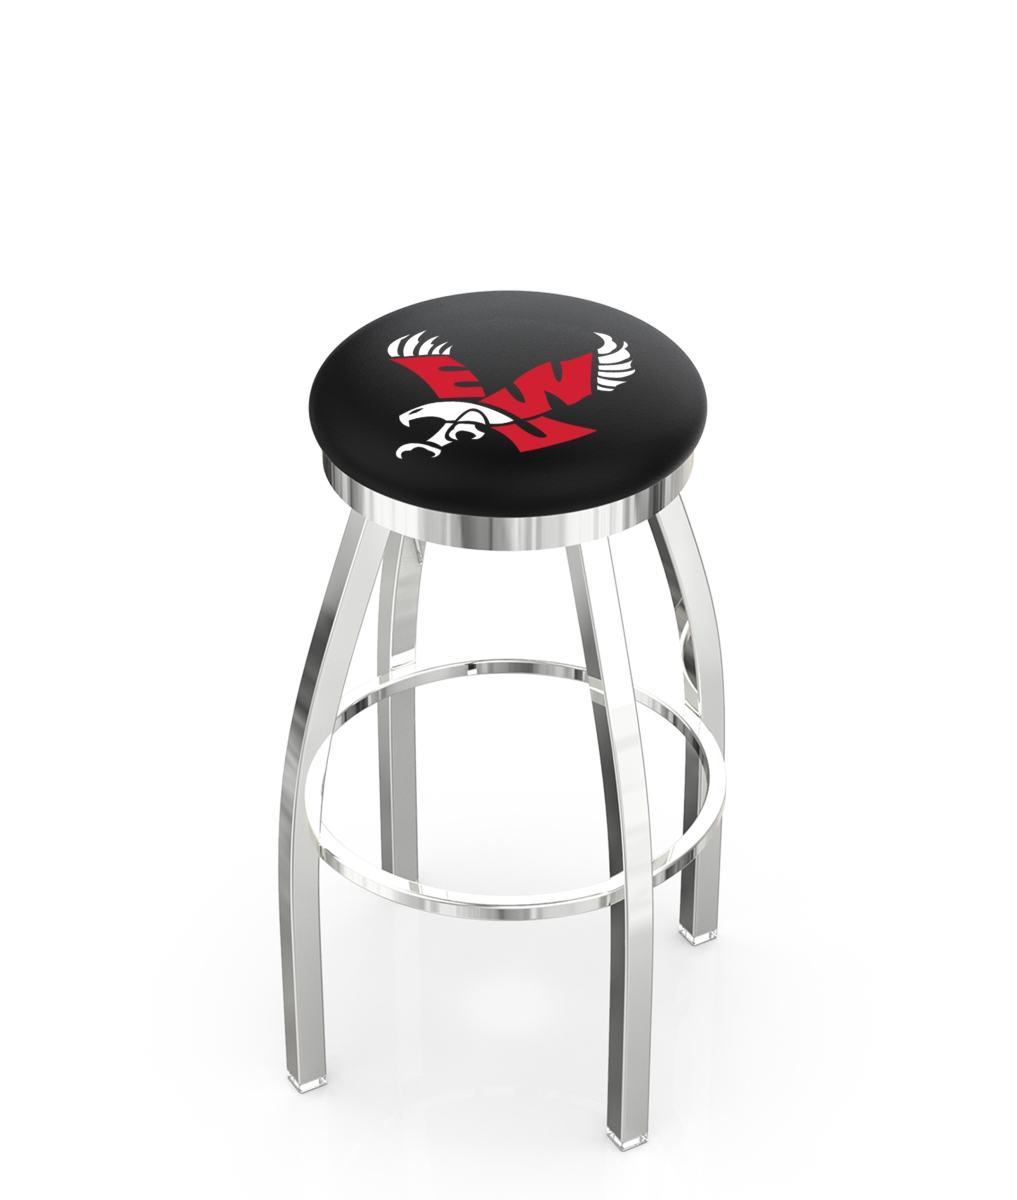 Picture of Holland Bar Stool L8C2C36EastWA 36 in. Eastern Washington Bar Stool with Eagles Logo Swivel Seat